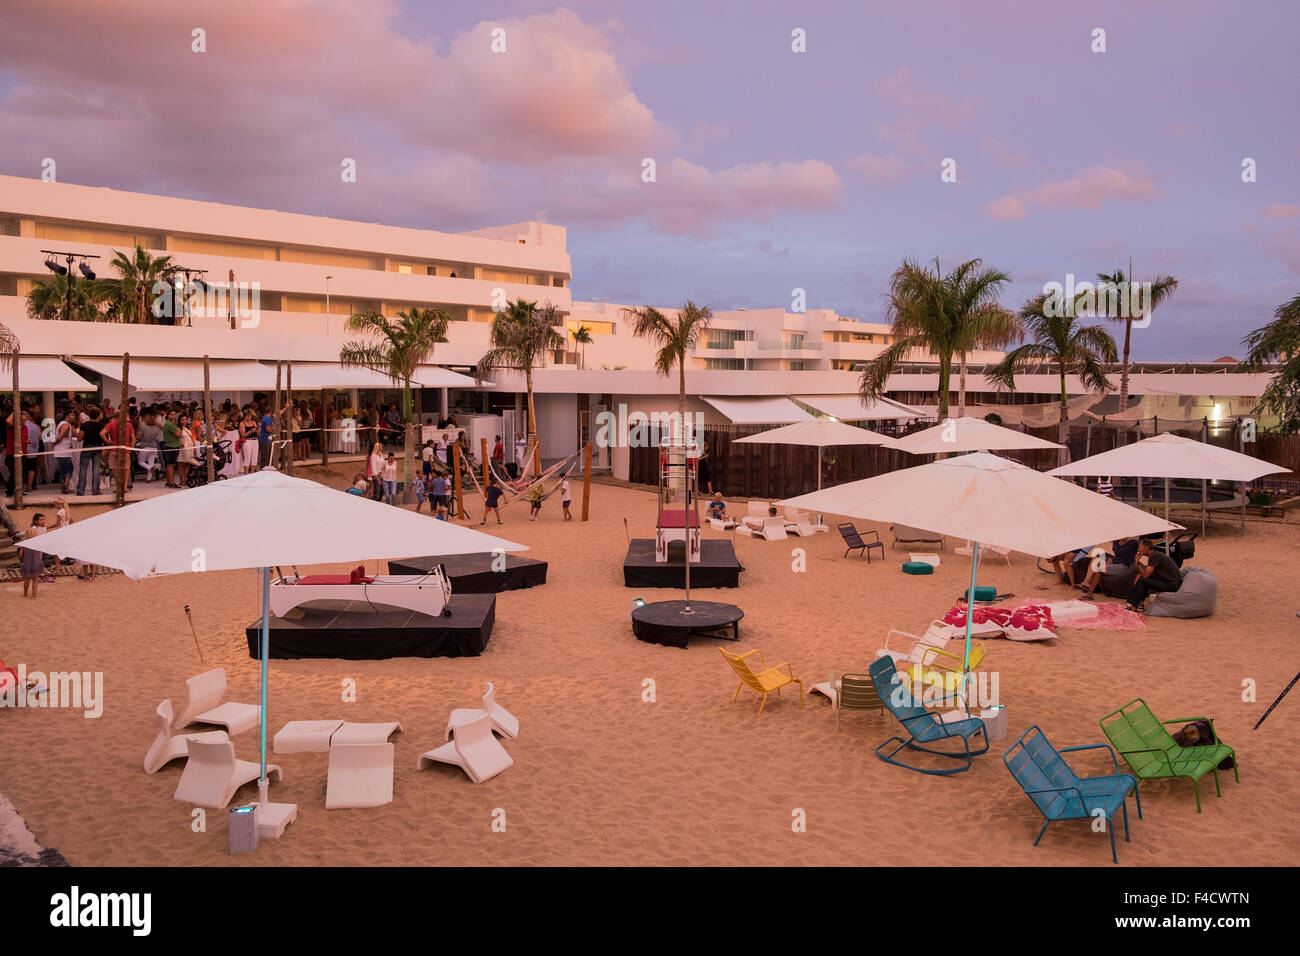 Artifical beach at the Activate sports club in Baobab Suites five star resort in Costa Adeje, Tenerife, Canary Islands, Spain. Stock Photo